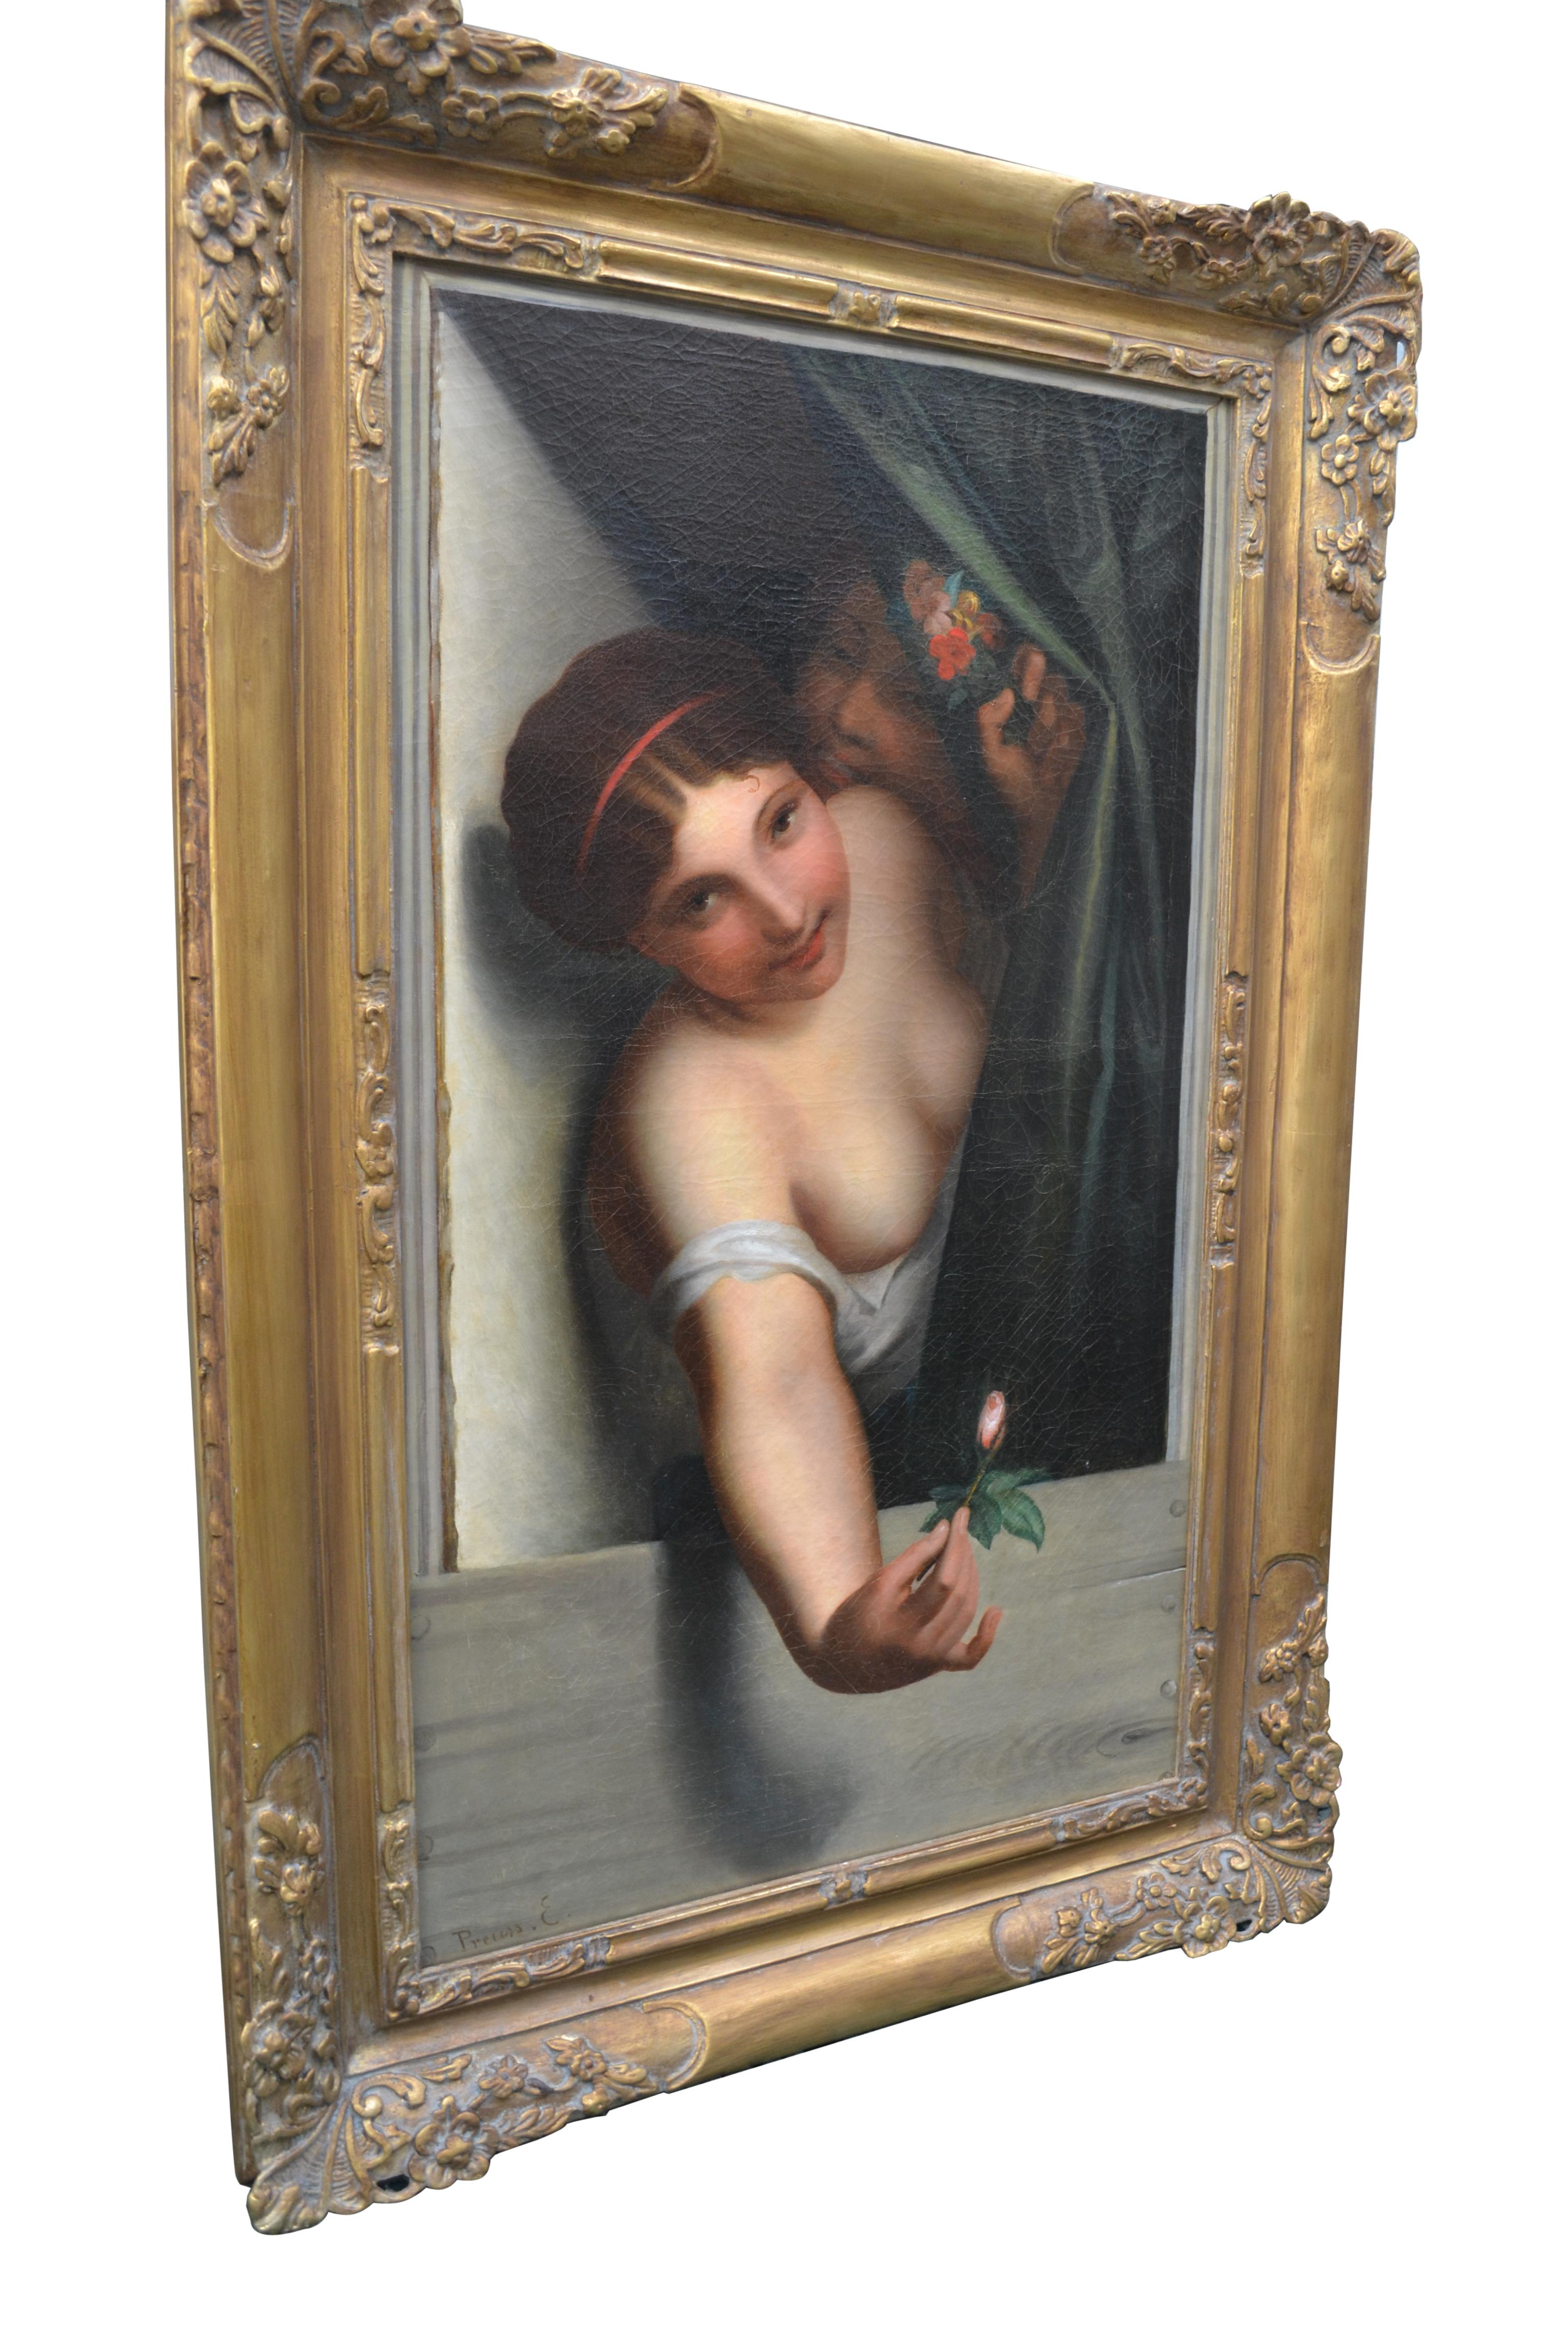 A very suggestive oil painting of a beautiful bare breasted woman which could be a prostitute or a temptress leaning out a mindow offering a rose bud to an admirer, and seemingly encouraged to do the gesture be a woman half hidden behind the